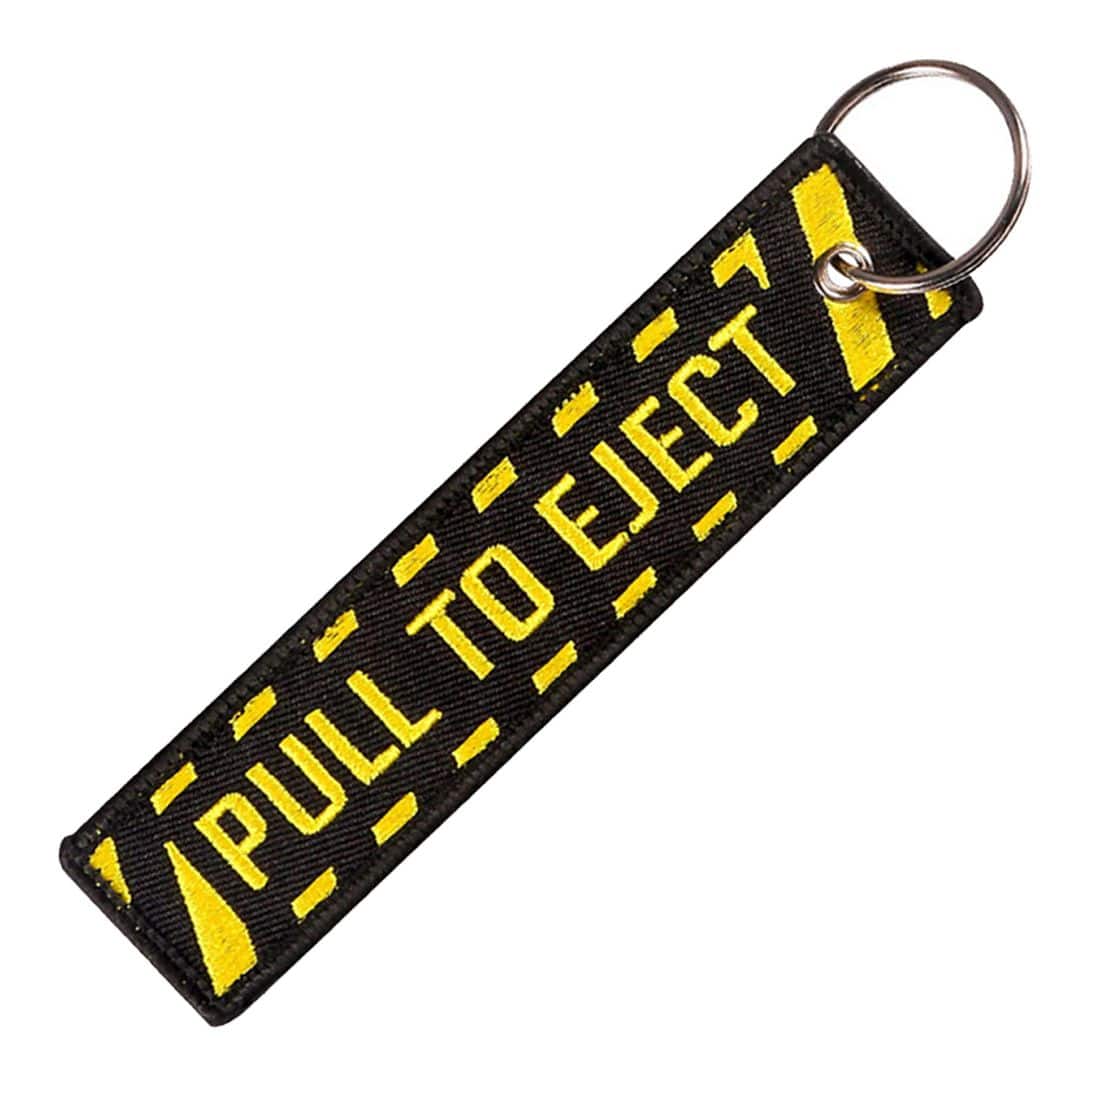 PULL TO EJECT embroidered key ring